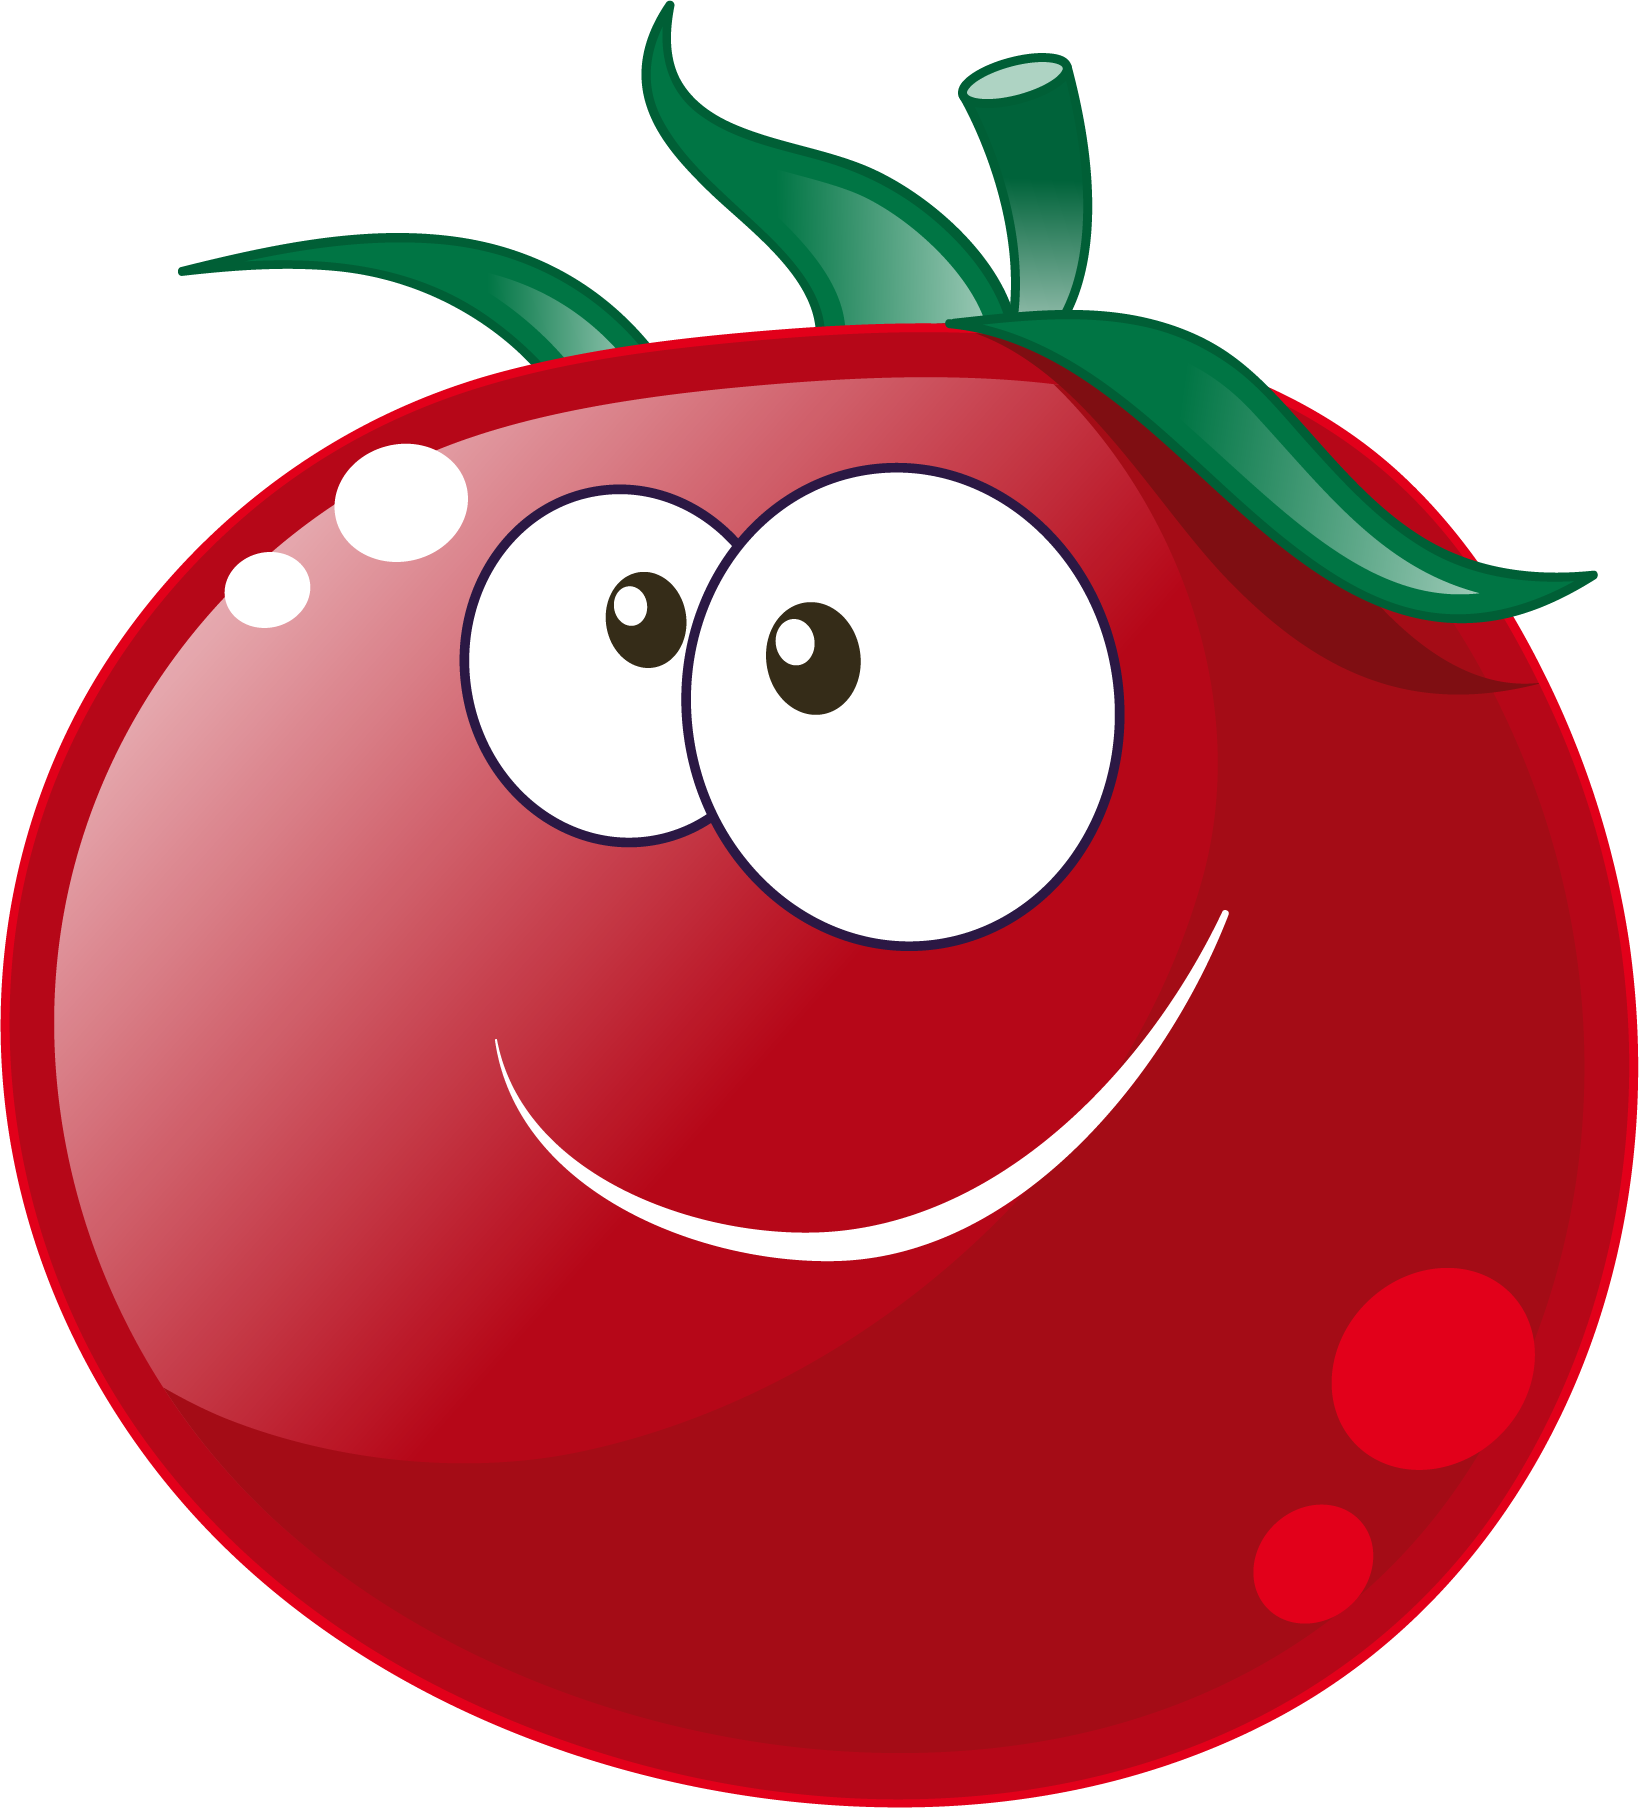 tomatoes clipart smile